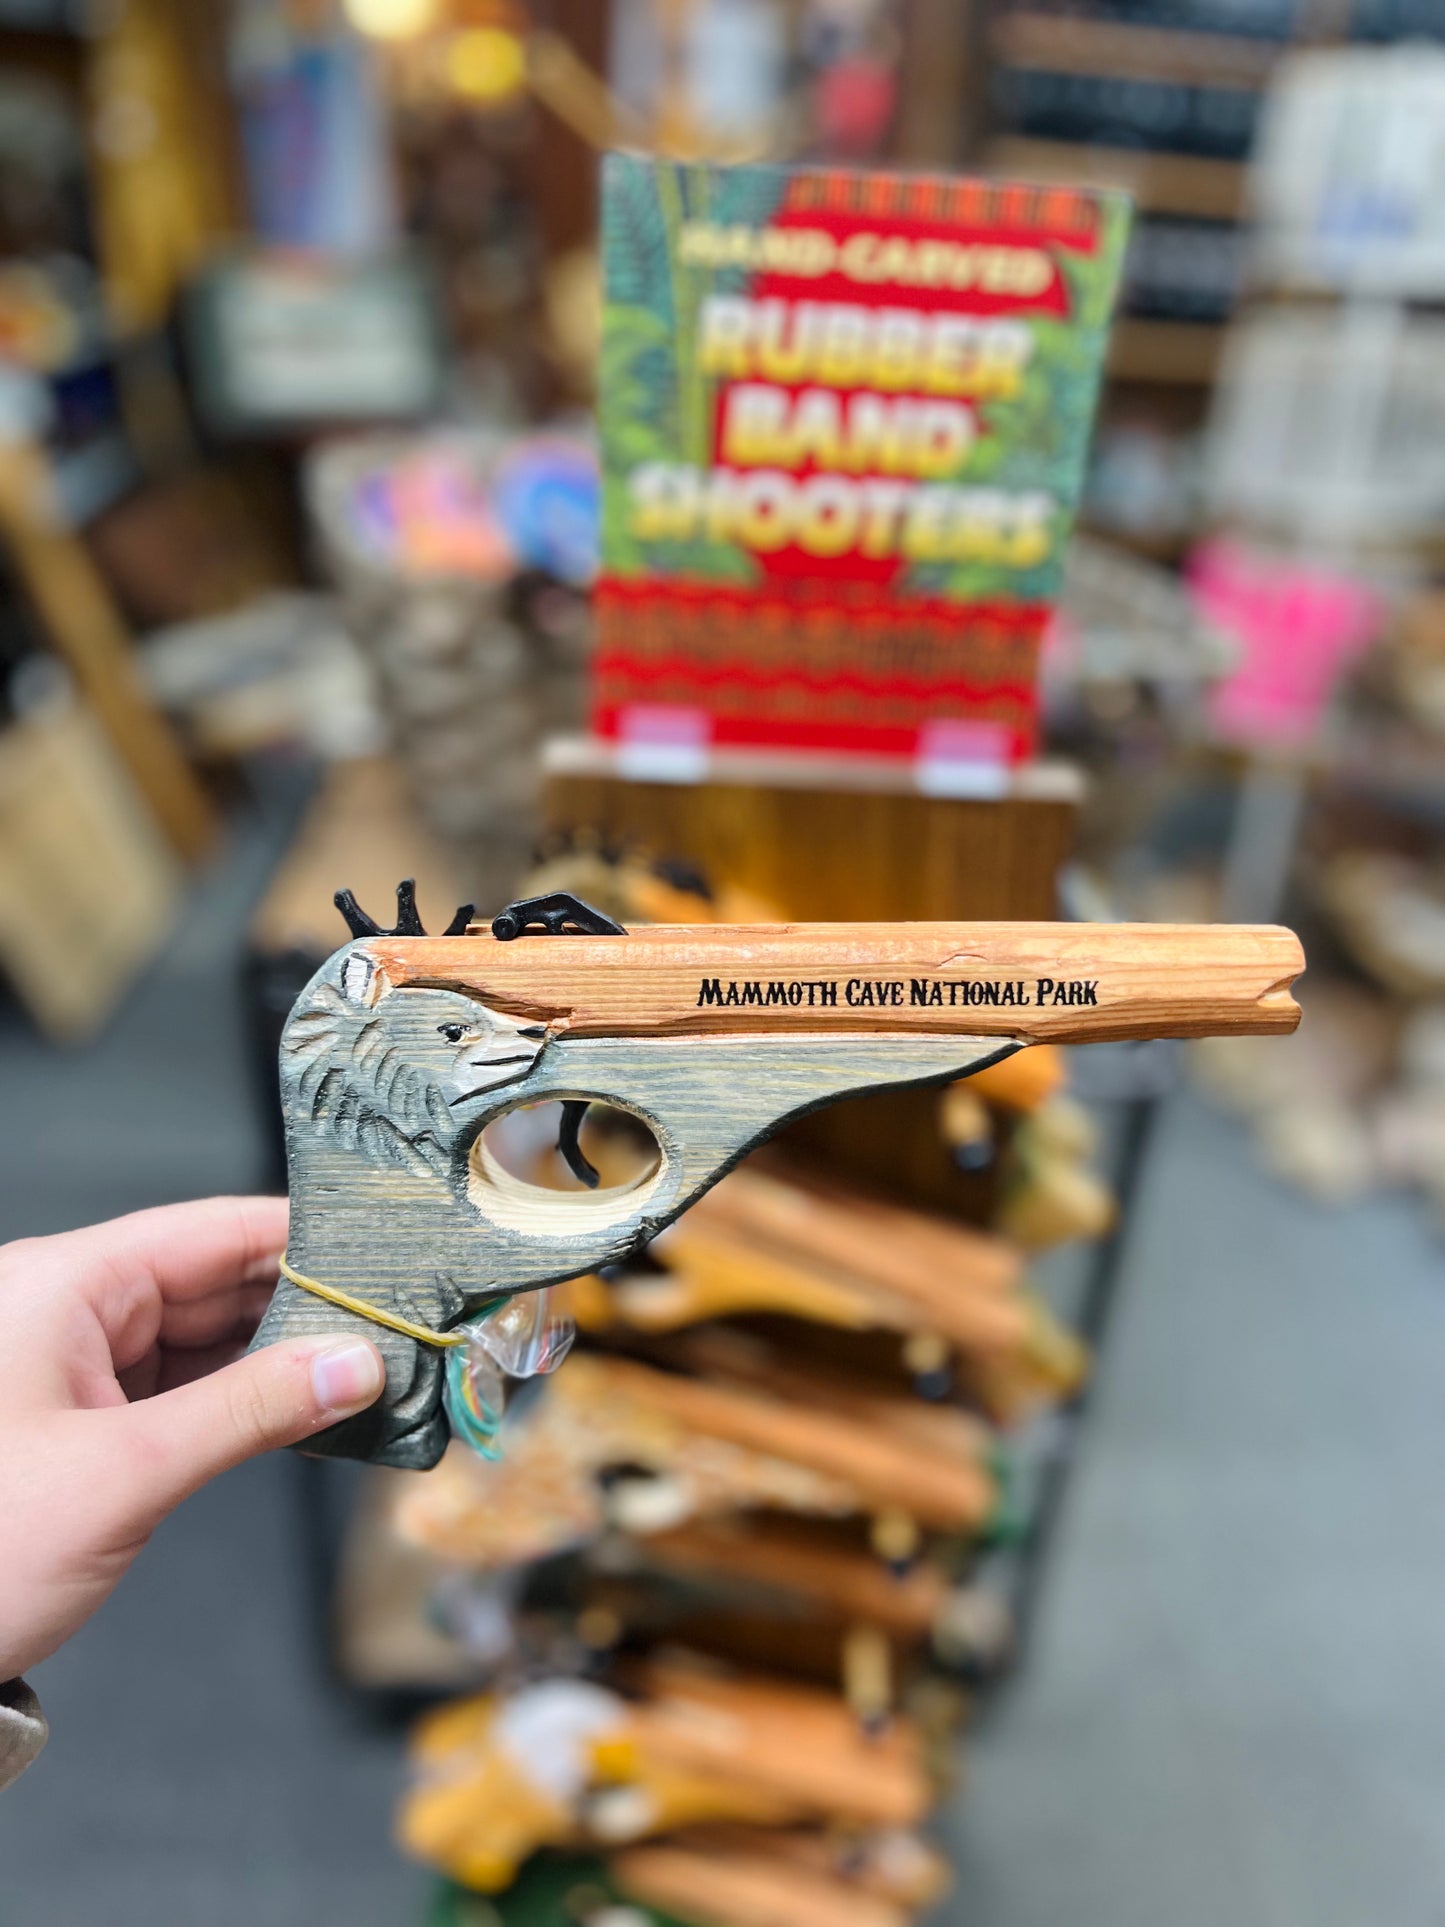 Hand Carved Rubber Band Gun